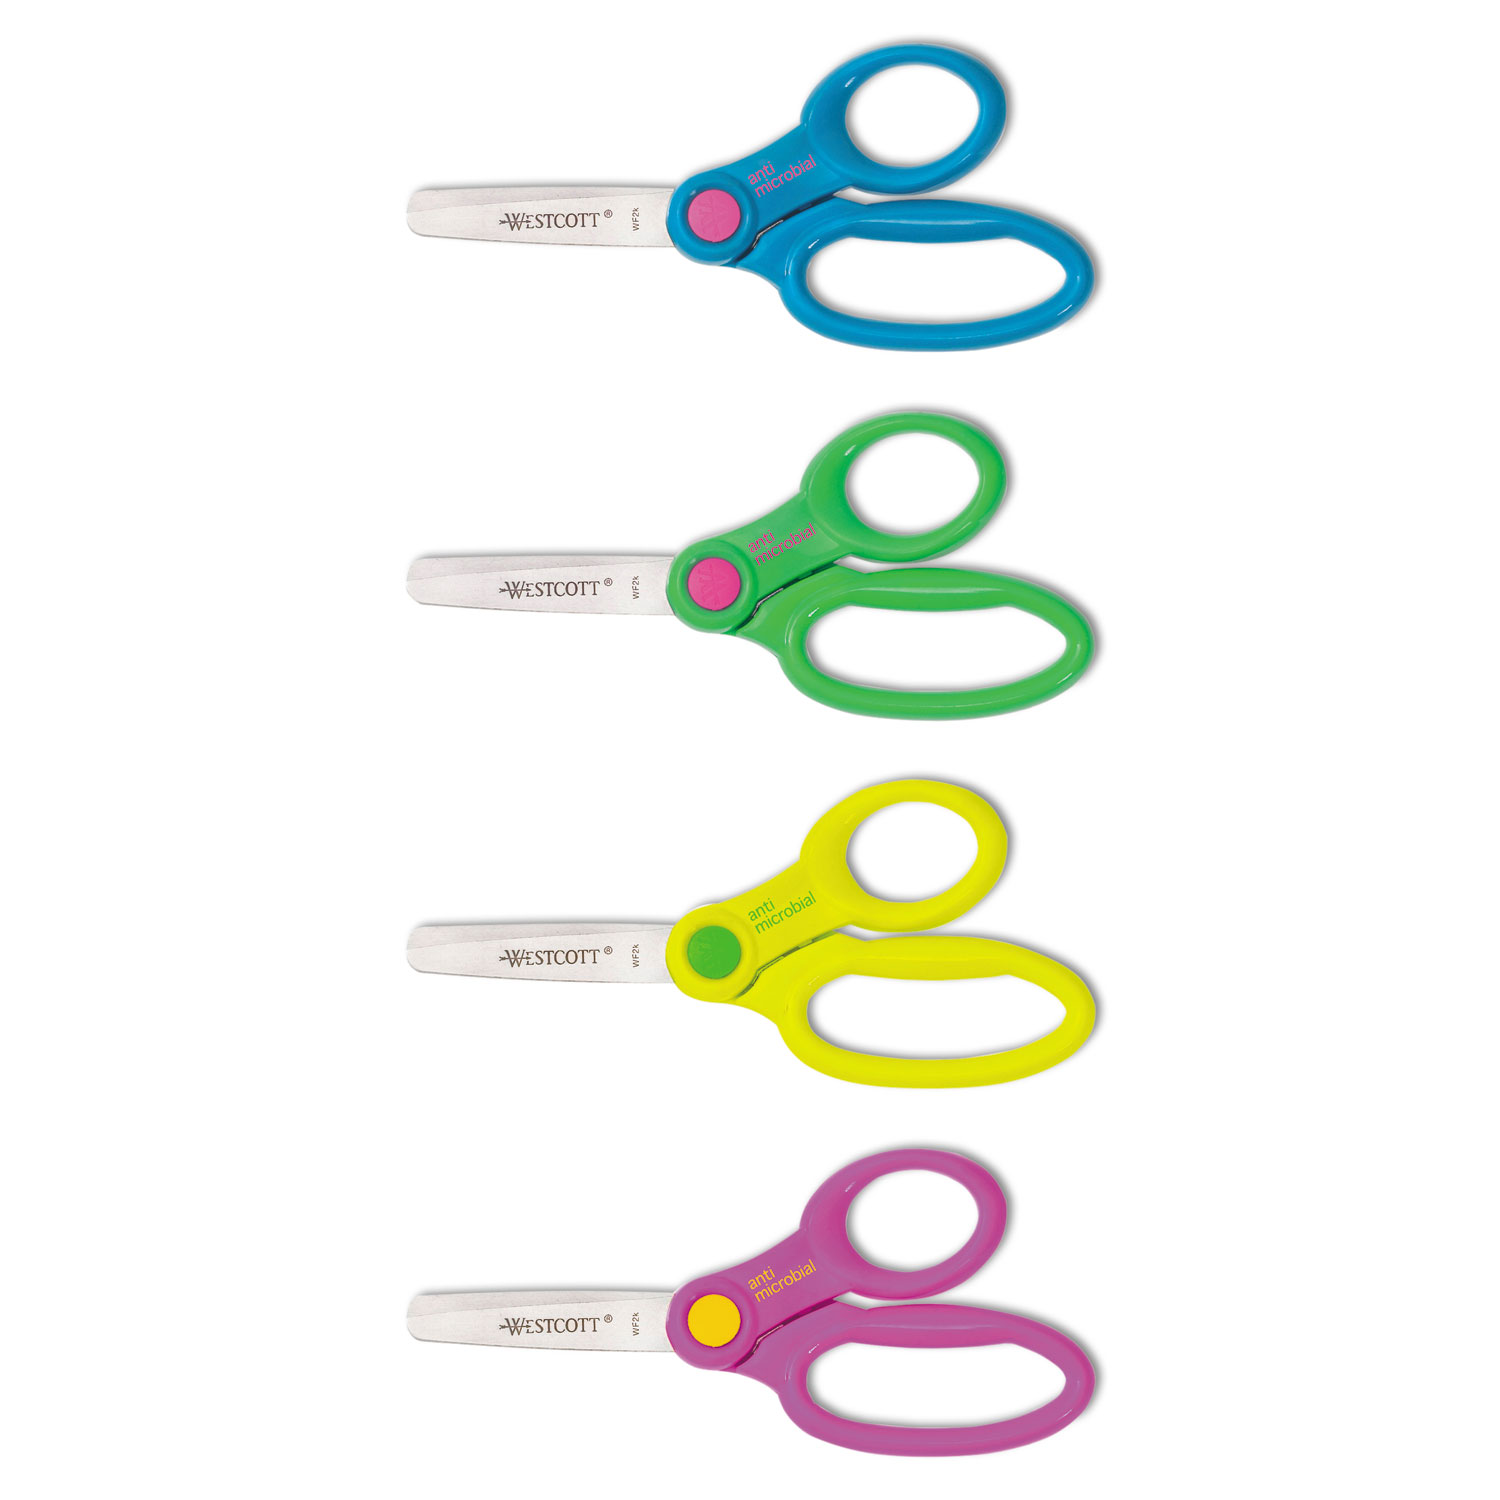  Westcott 14606 Kids' Scissors with Antimicrobial Protection, Rounded Tip, 5 Long, 2 Cut Length, Randomly Assorted Straight Handles (ACM14606) 